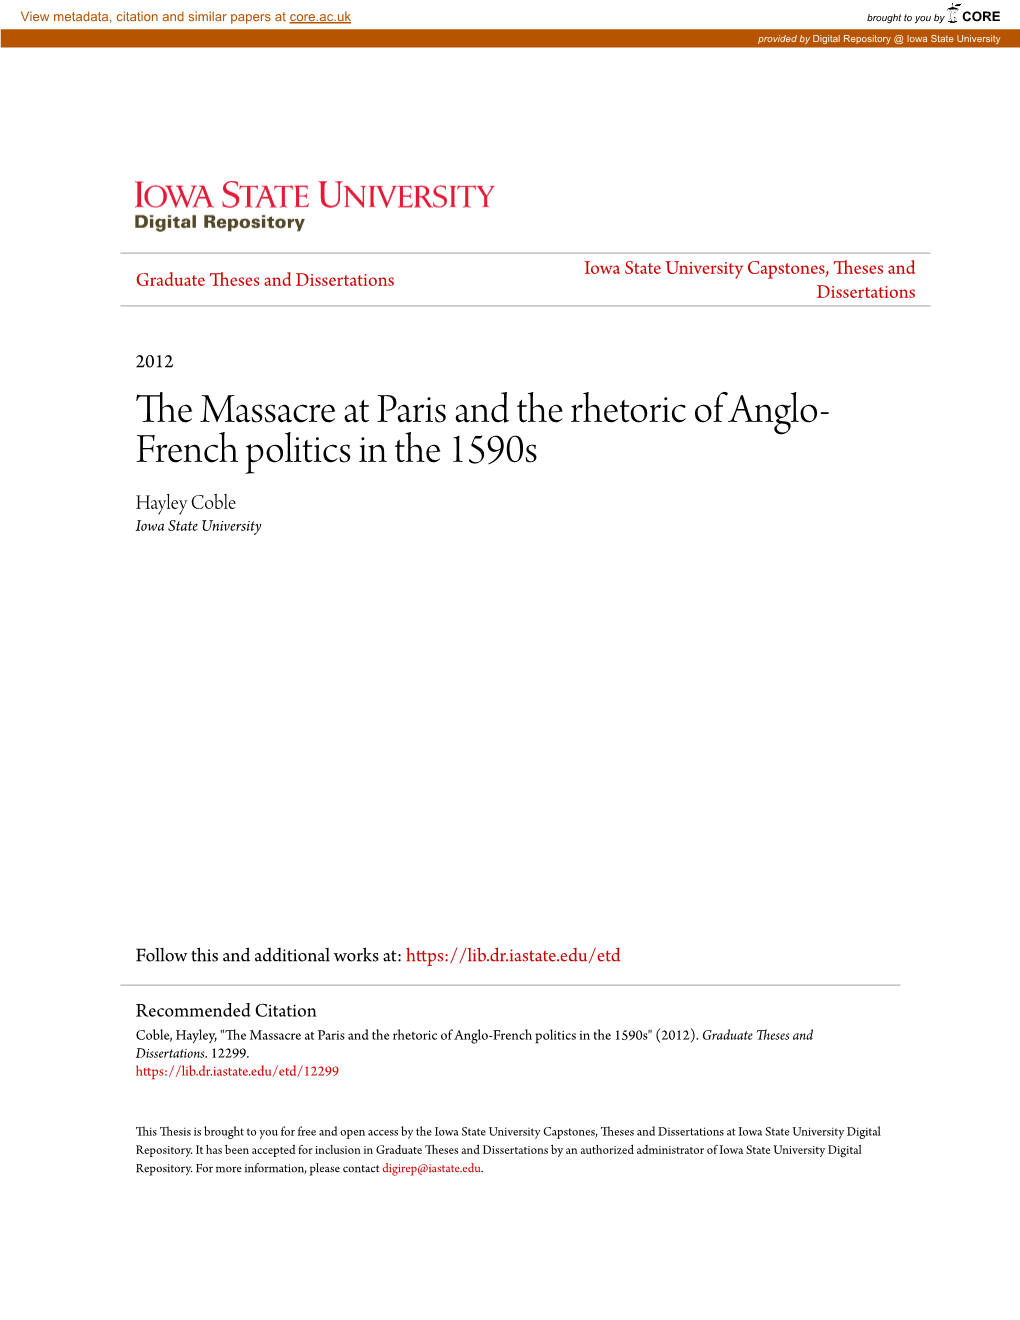 The Massacre at Paris and the Rhetoric of Anglo-French Politics in the 1590S